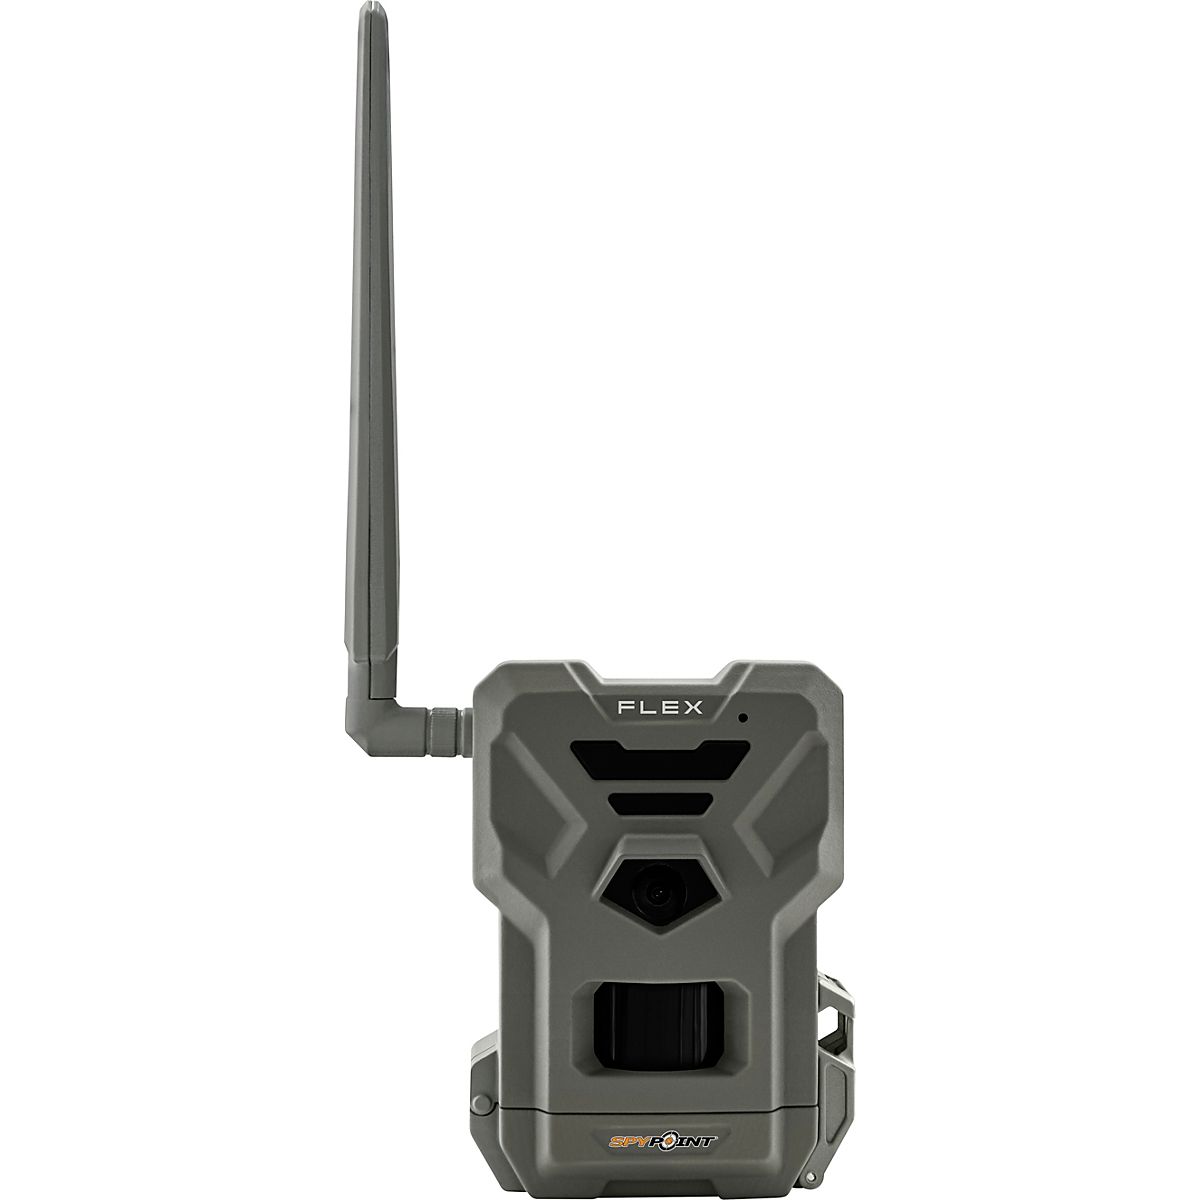 SpyPoint Flex 33.0 MP Trail Cellular Camera with Video $99